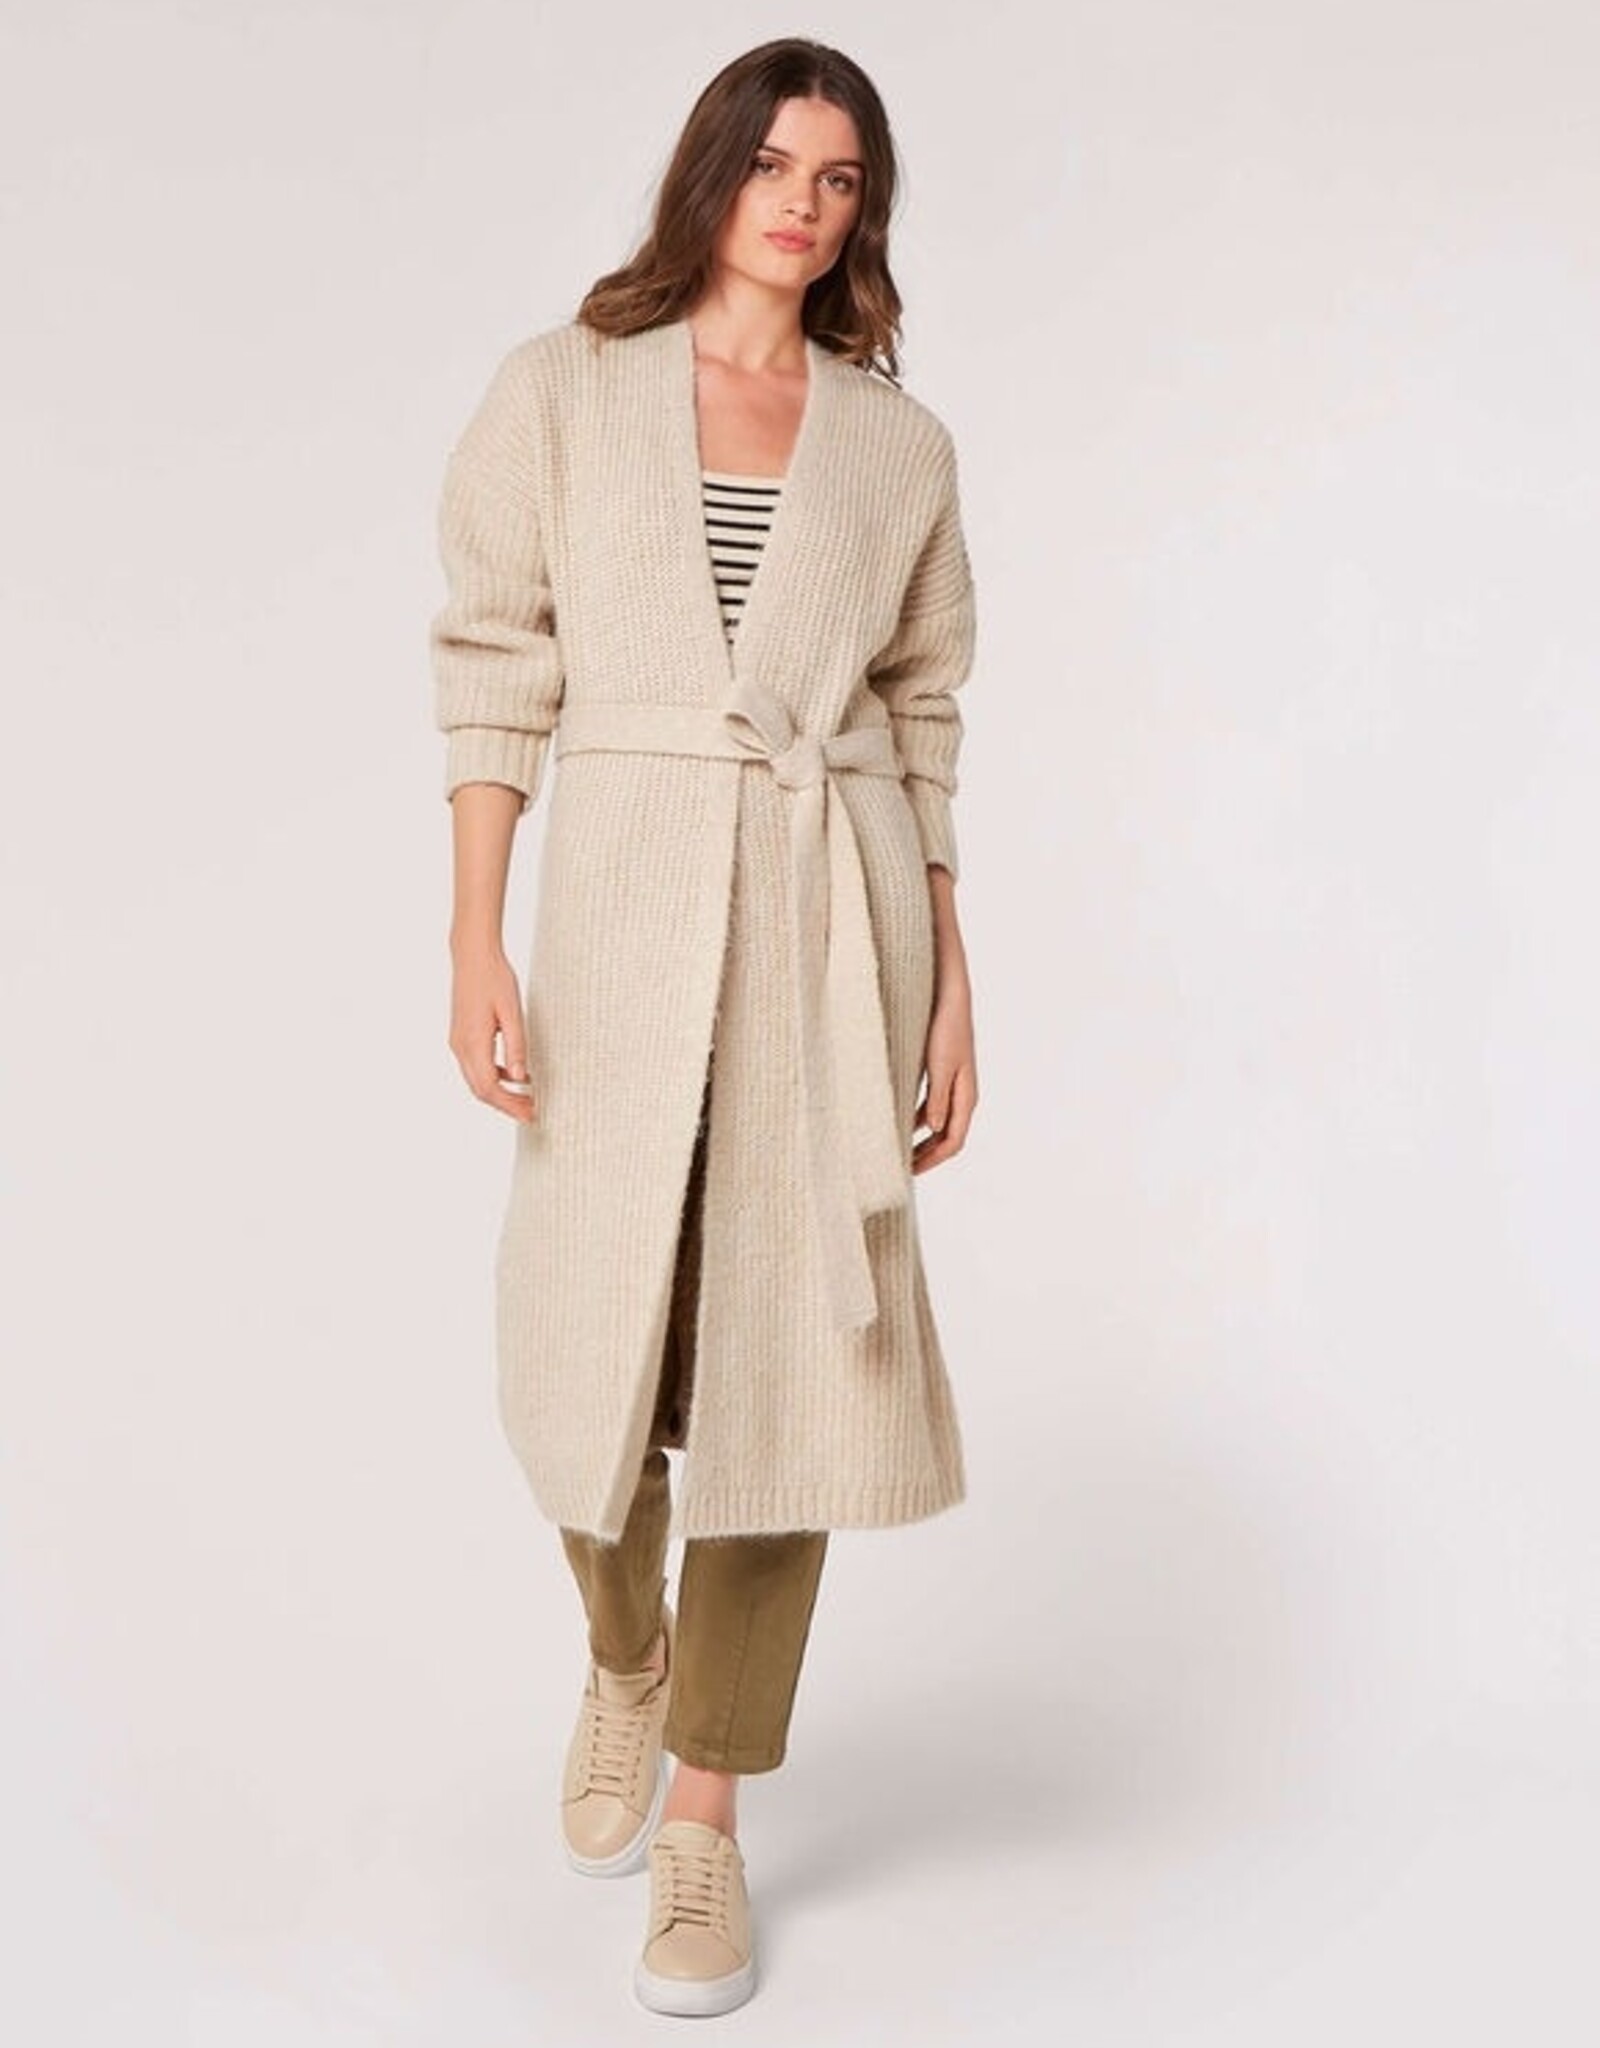 Apricot Apricot Luxe Fisherman Knit In Longline Cardigan